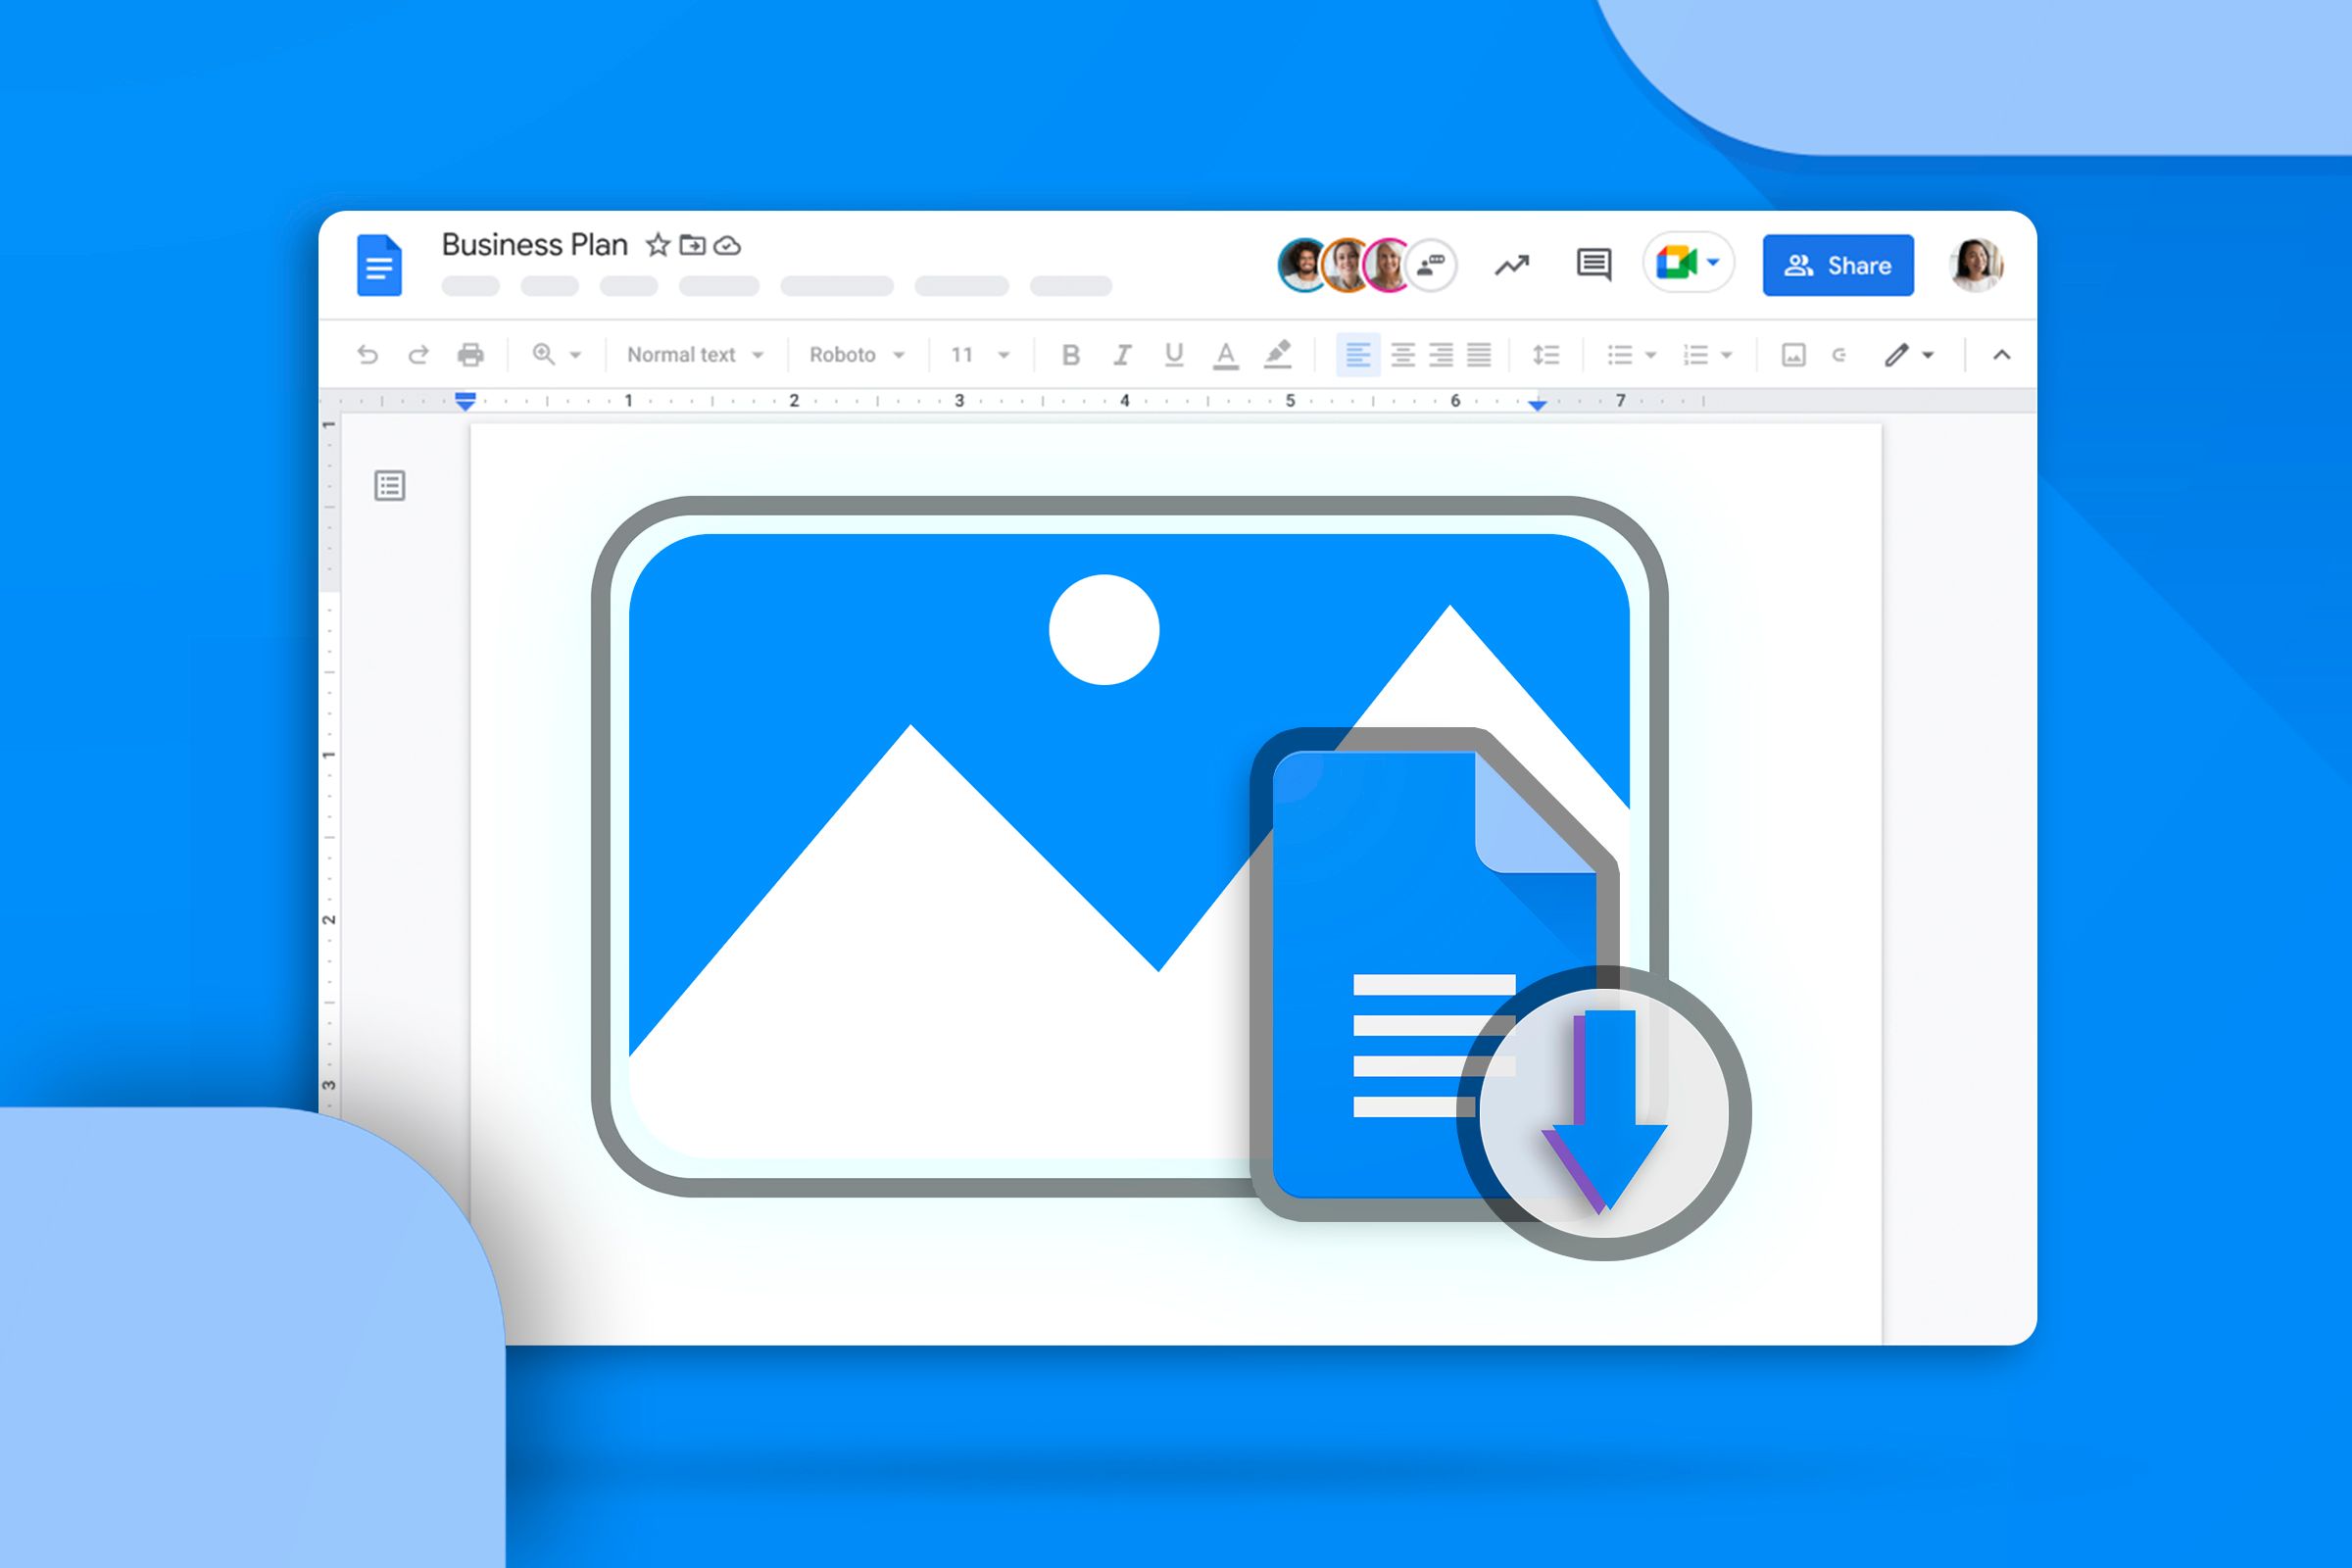 Google Docs window with an image download icon.